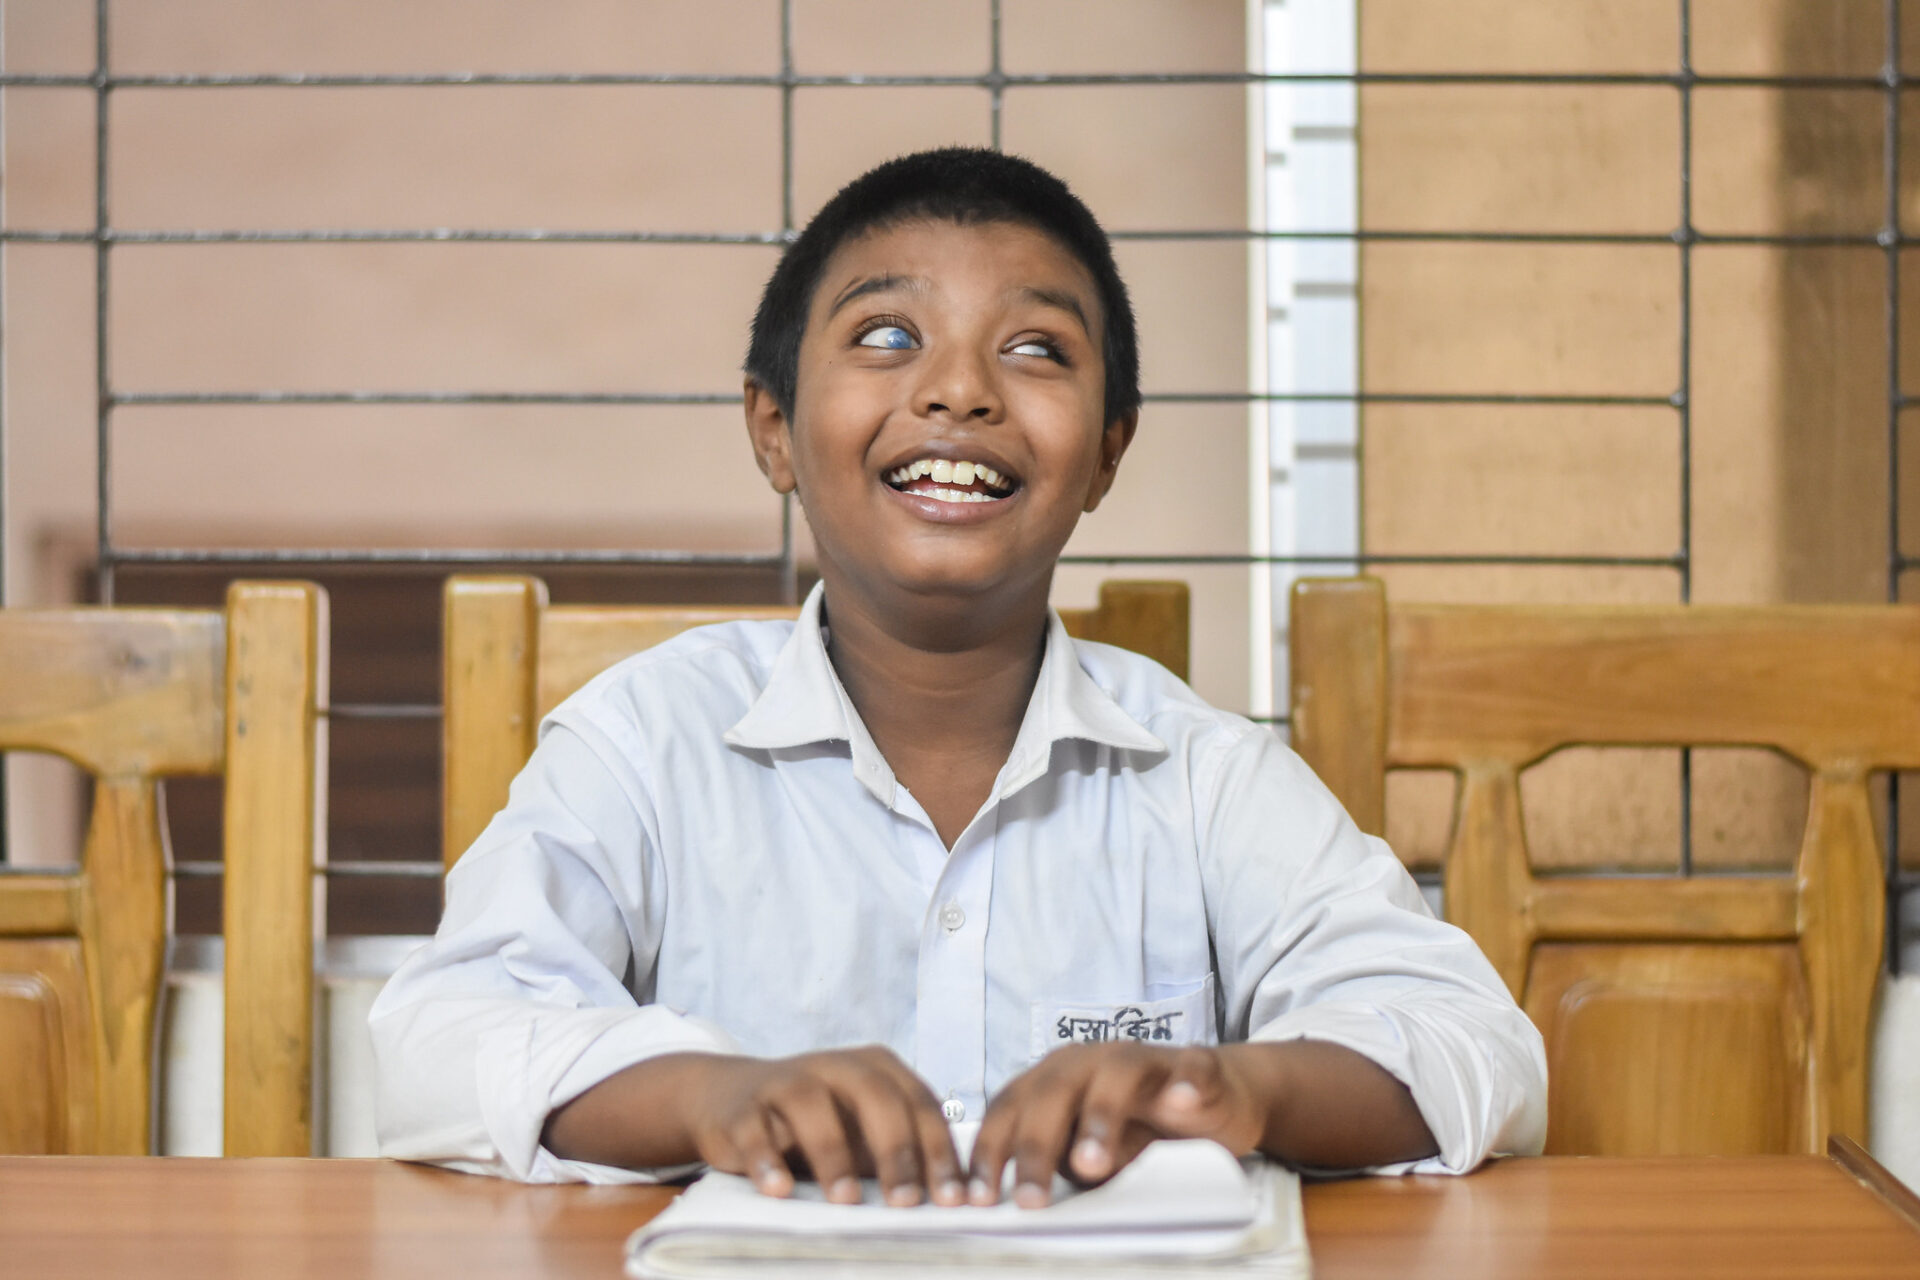 A young boy who loves to read, uses the Braille method. He is very happy to show his Braille book and talked about his future ambitions. He smiles brightly at the camera.